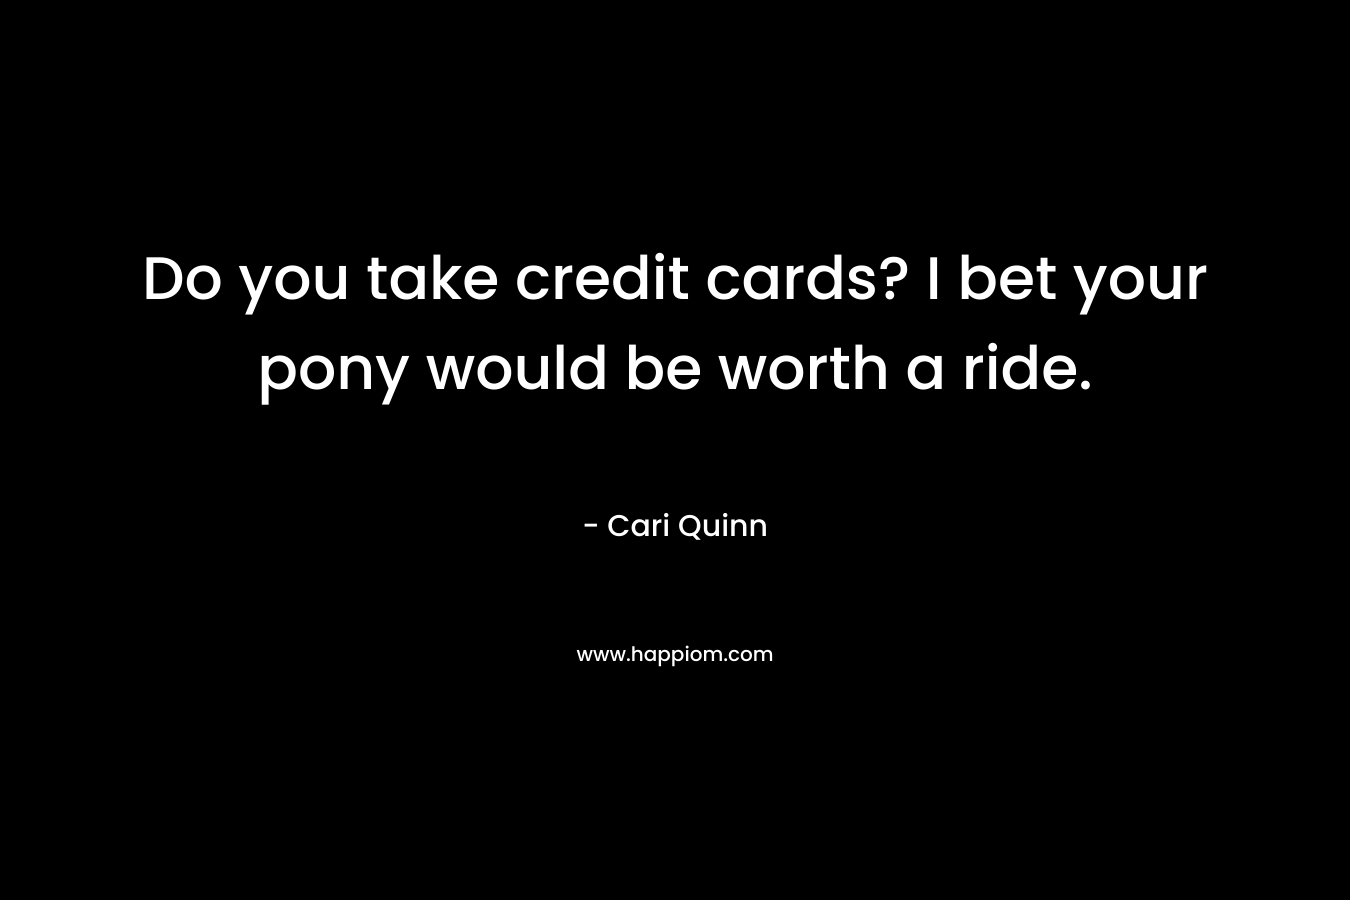 Do you take credit cards? I bet your pony would be worth a ride. – Cari Quinn